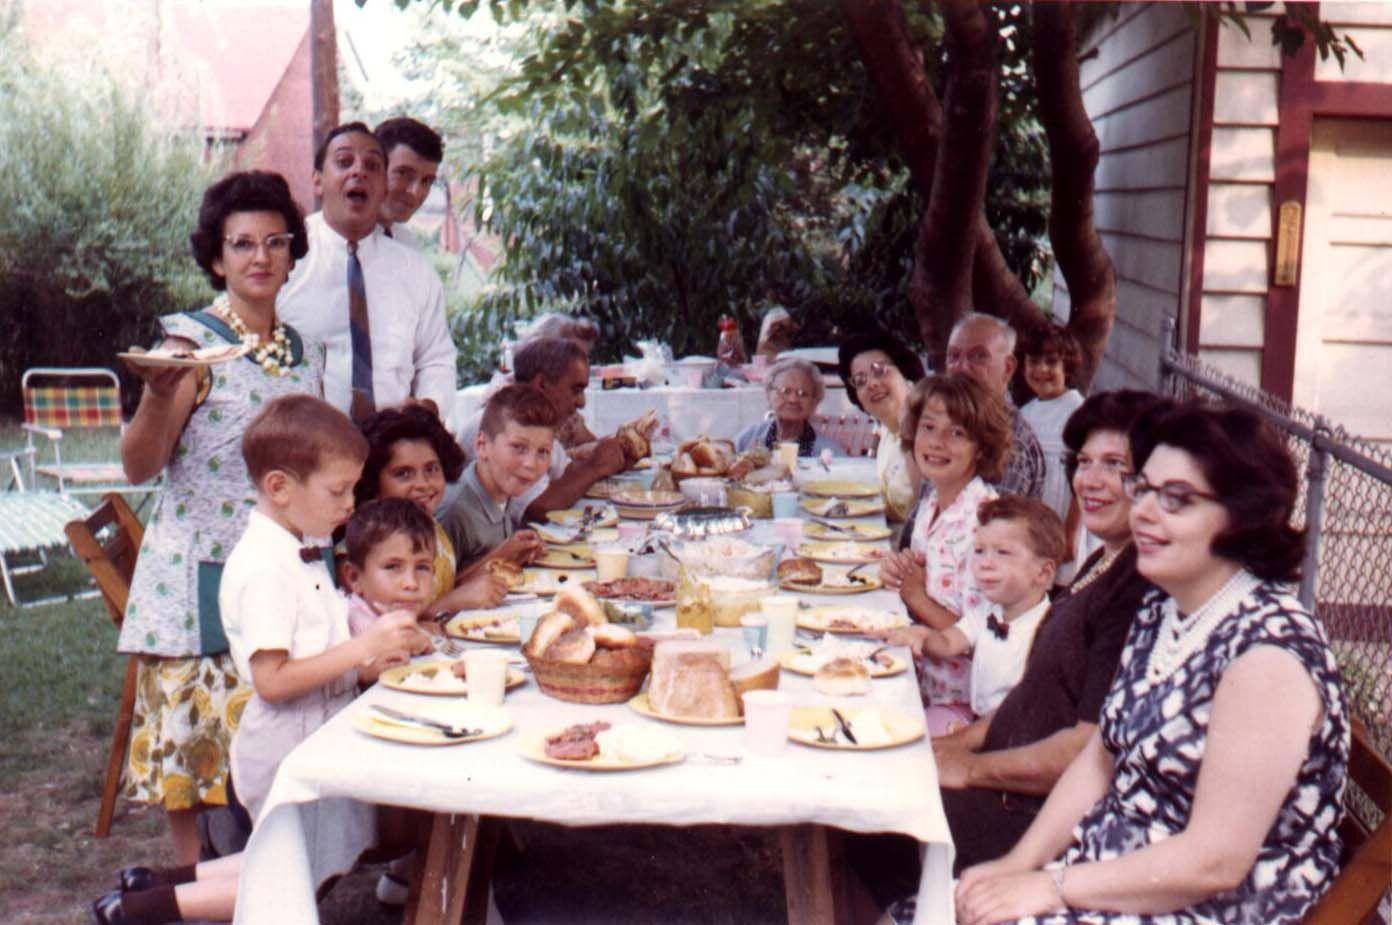 This is one of our frequent backyard get togethers at my Aunt's home in Secaucus, NJ circa 1963. I'm the joker in the gray shirt. My Dad is behind me wearing a tie and my Mom is second from the right with the pearls.

My brothers are the little guys with bow ties and the rest of the kids are cousins. Except the lovely blonde girl directly across from me, a friend of my cousins, who I had a huge crush on for years. My grandparents are seated to my left and my great-grandmother is at the far end of the table. 

The photo was likely taken by my Uncle Gerard who always had a camera ready. His wife, my wonderful Aunt Greta, is the hostess holding the plate. 